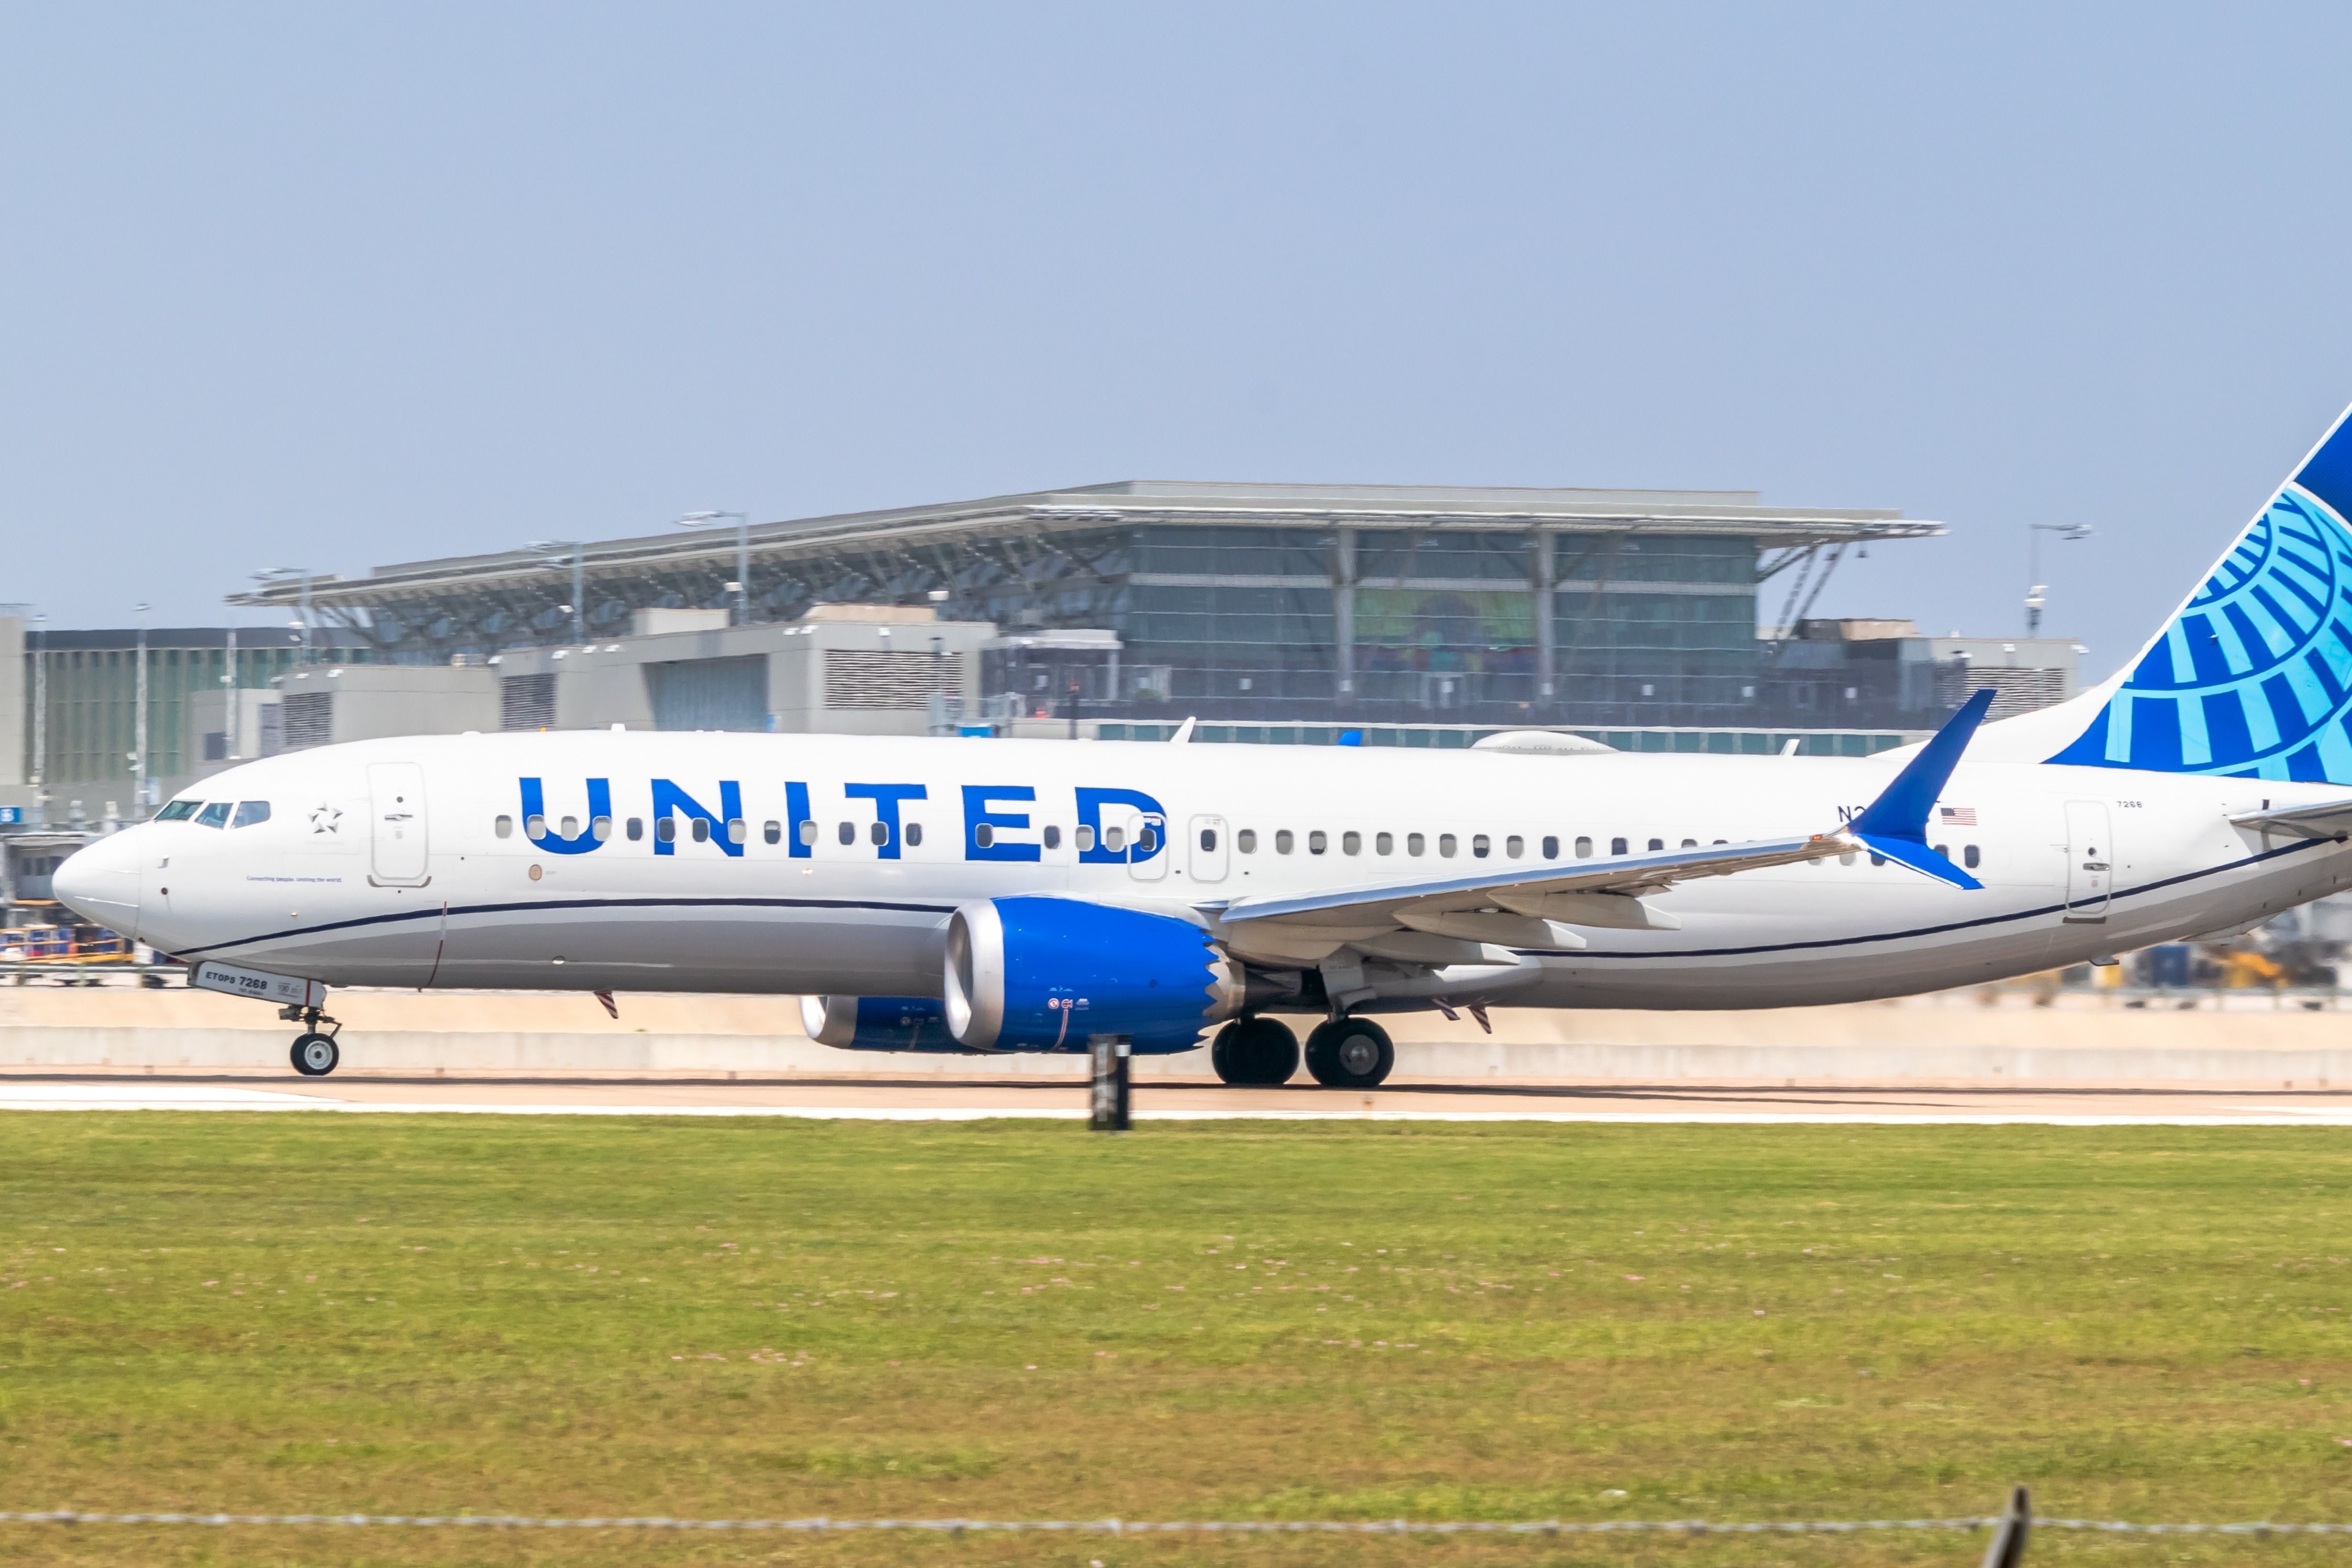 United Airlines Boeing 737 MAX 8 taking off from Runway 18L at Austin–Bergstrom International Airport.